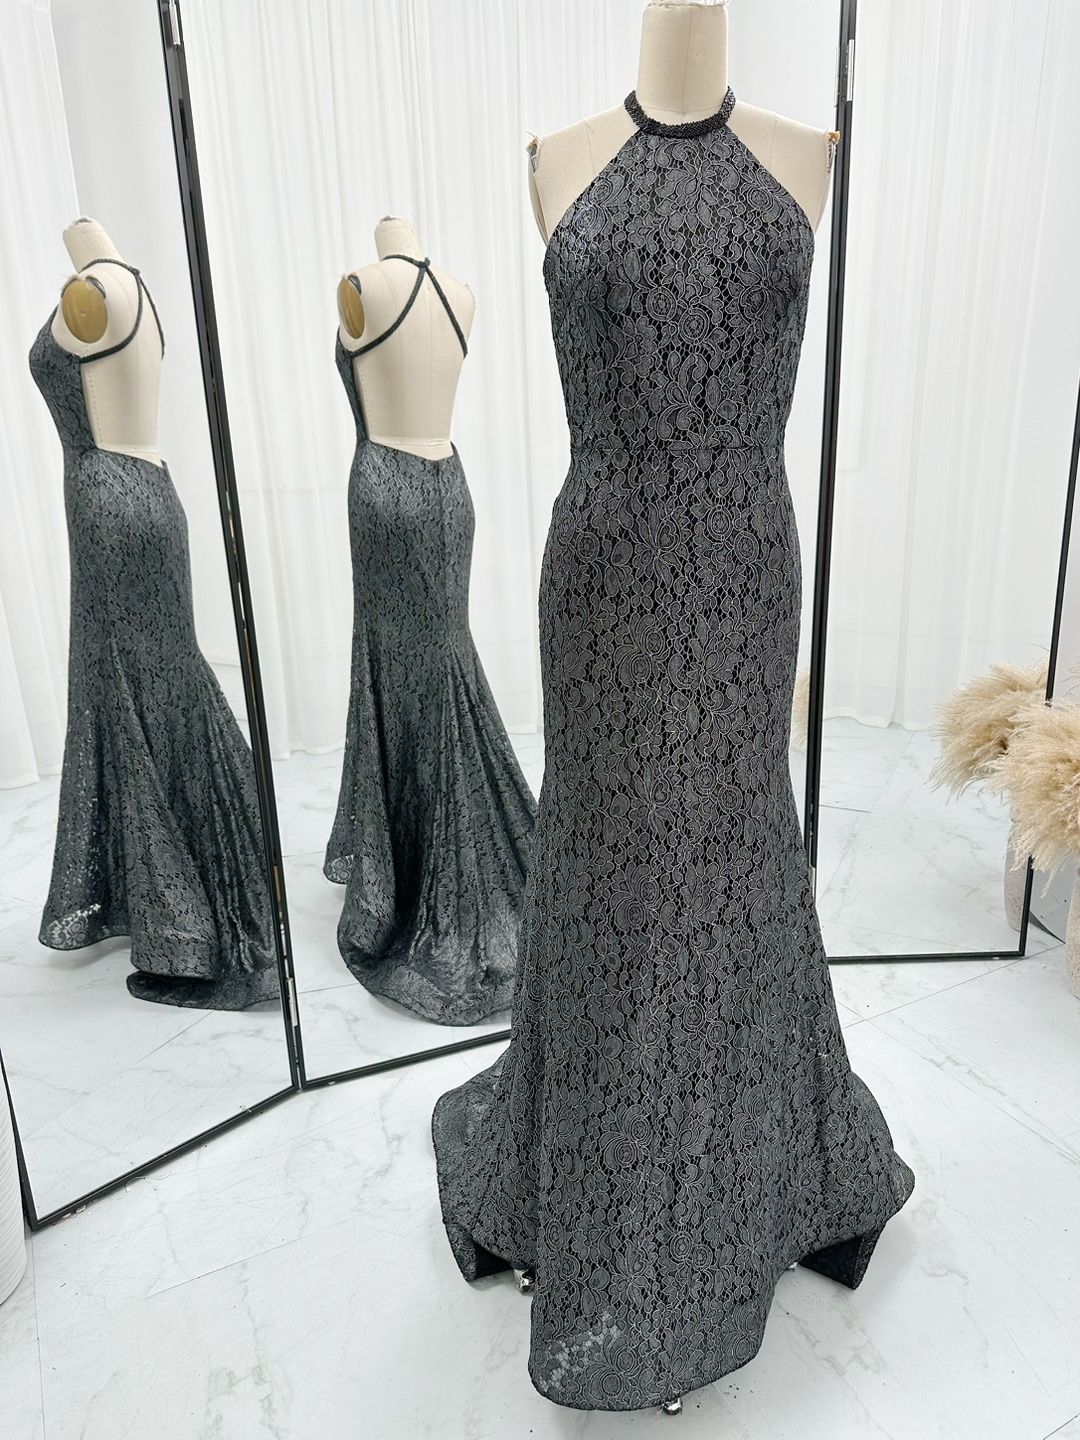 Backless Black Lace Prom Dress Formal Occasion Gown